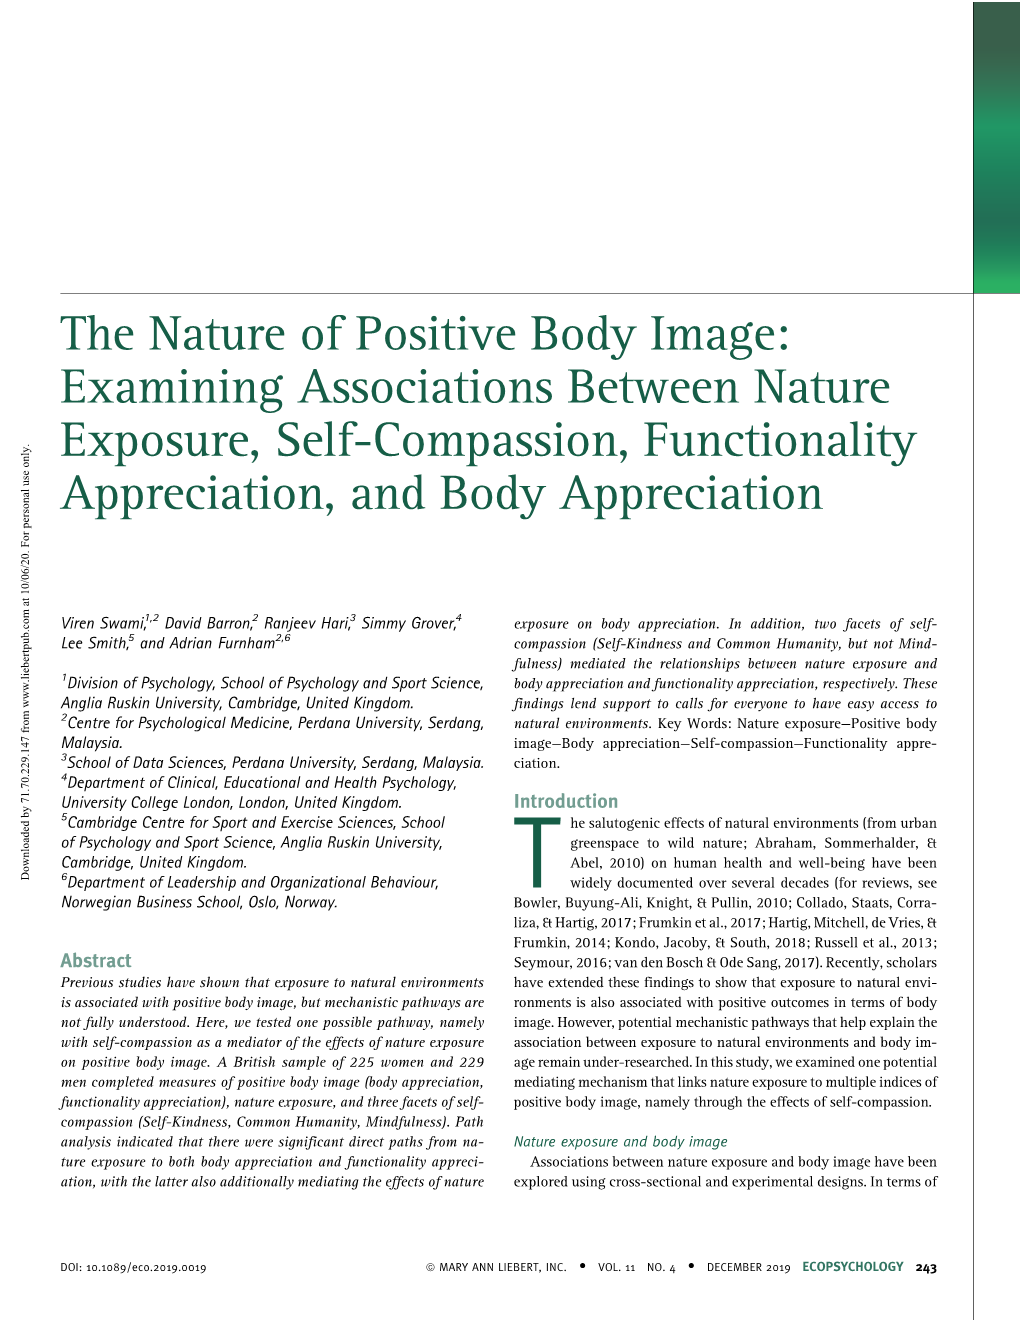 The Nature of Positive Body Image: Examining Associations Between Nature Exposure, Self-Compassion, Functionality Appreciation, and Body Appreciation